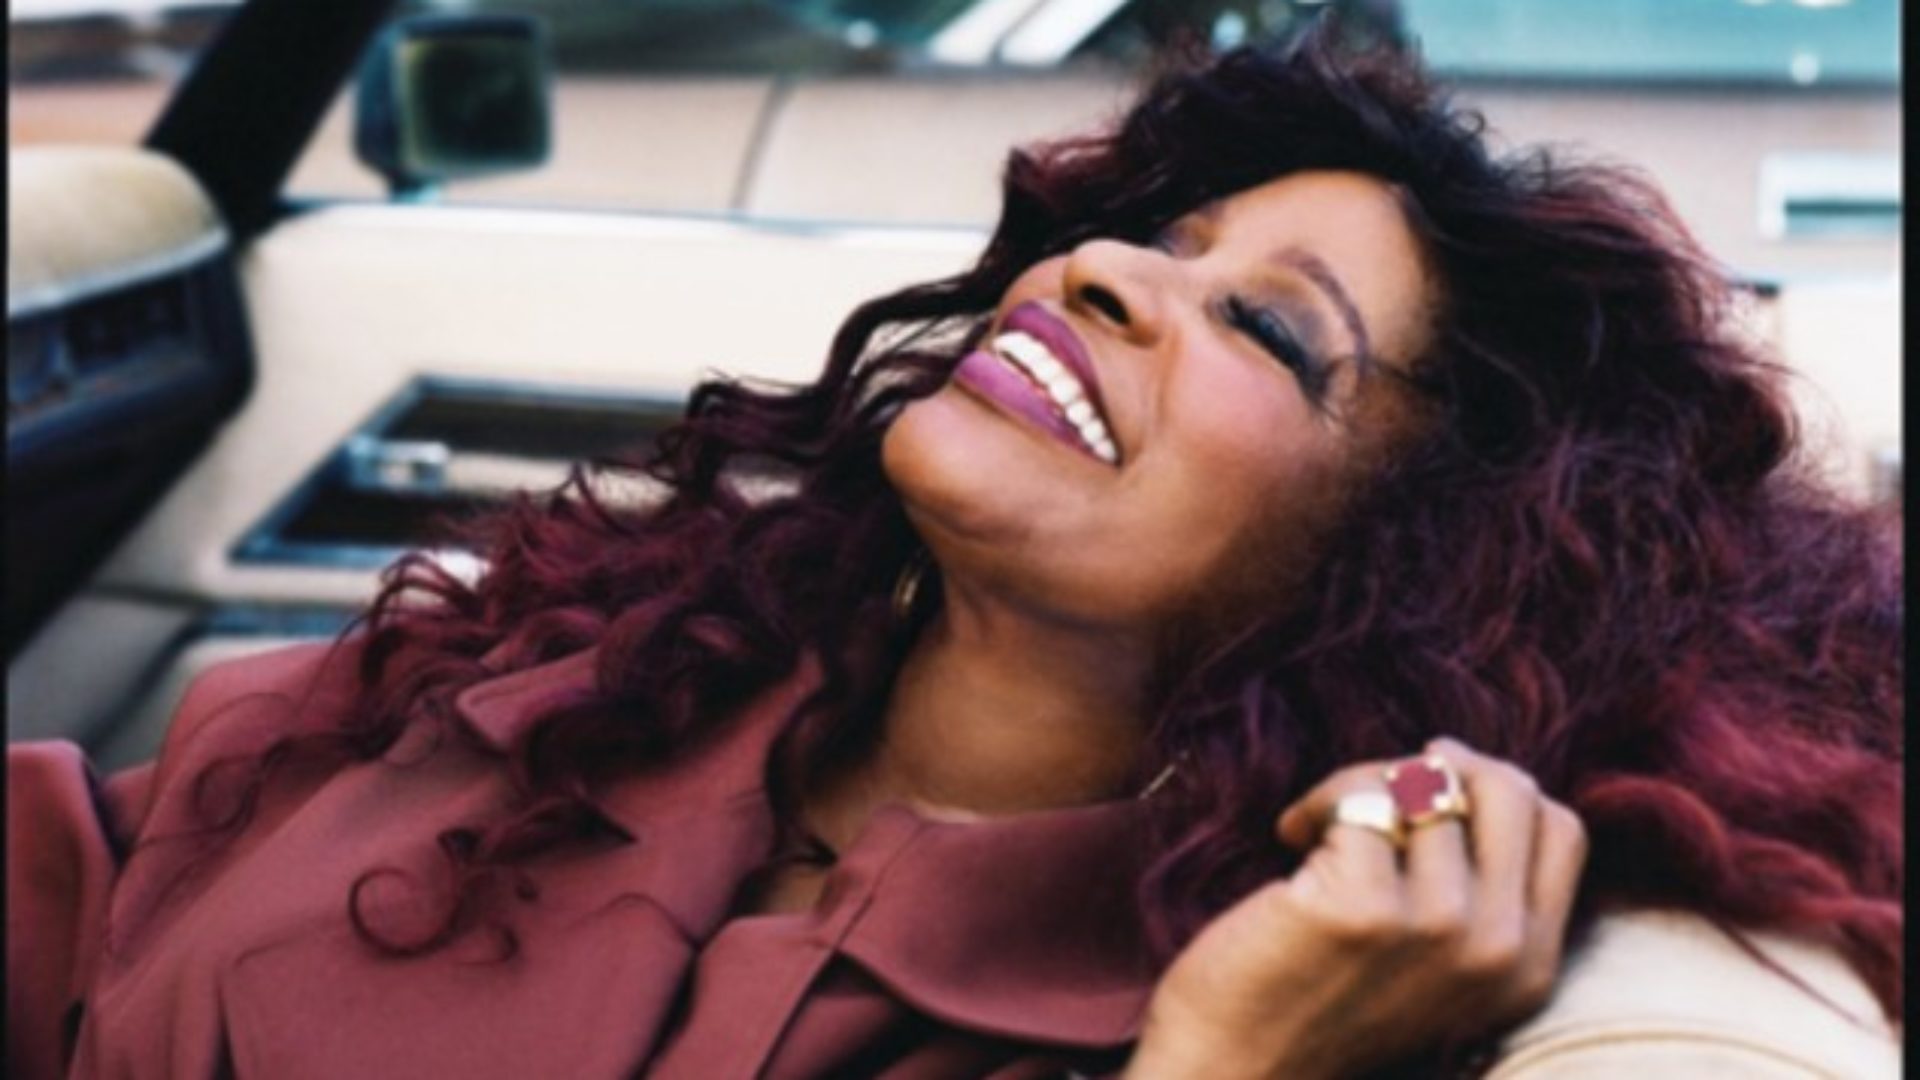 Chaka Khan On Her Journey From A Singer With Big Hair To Hair-preneur